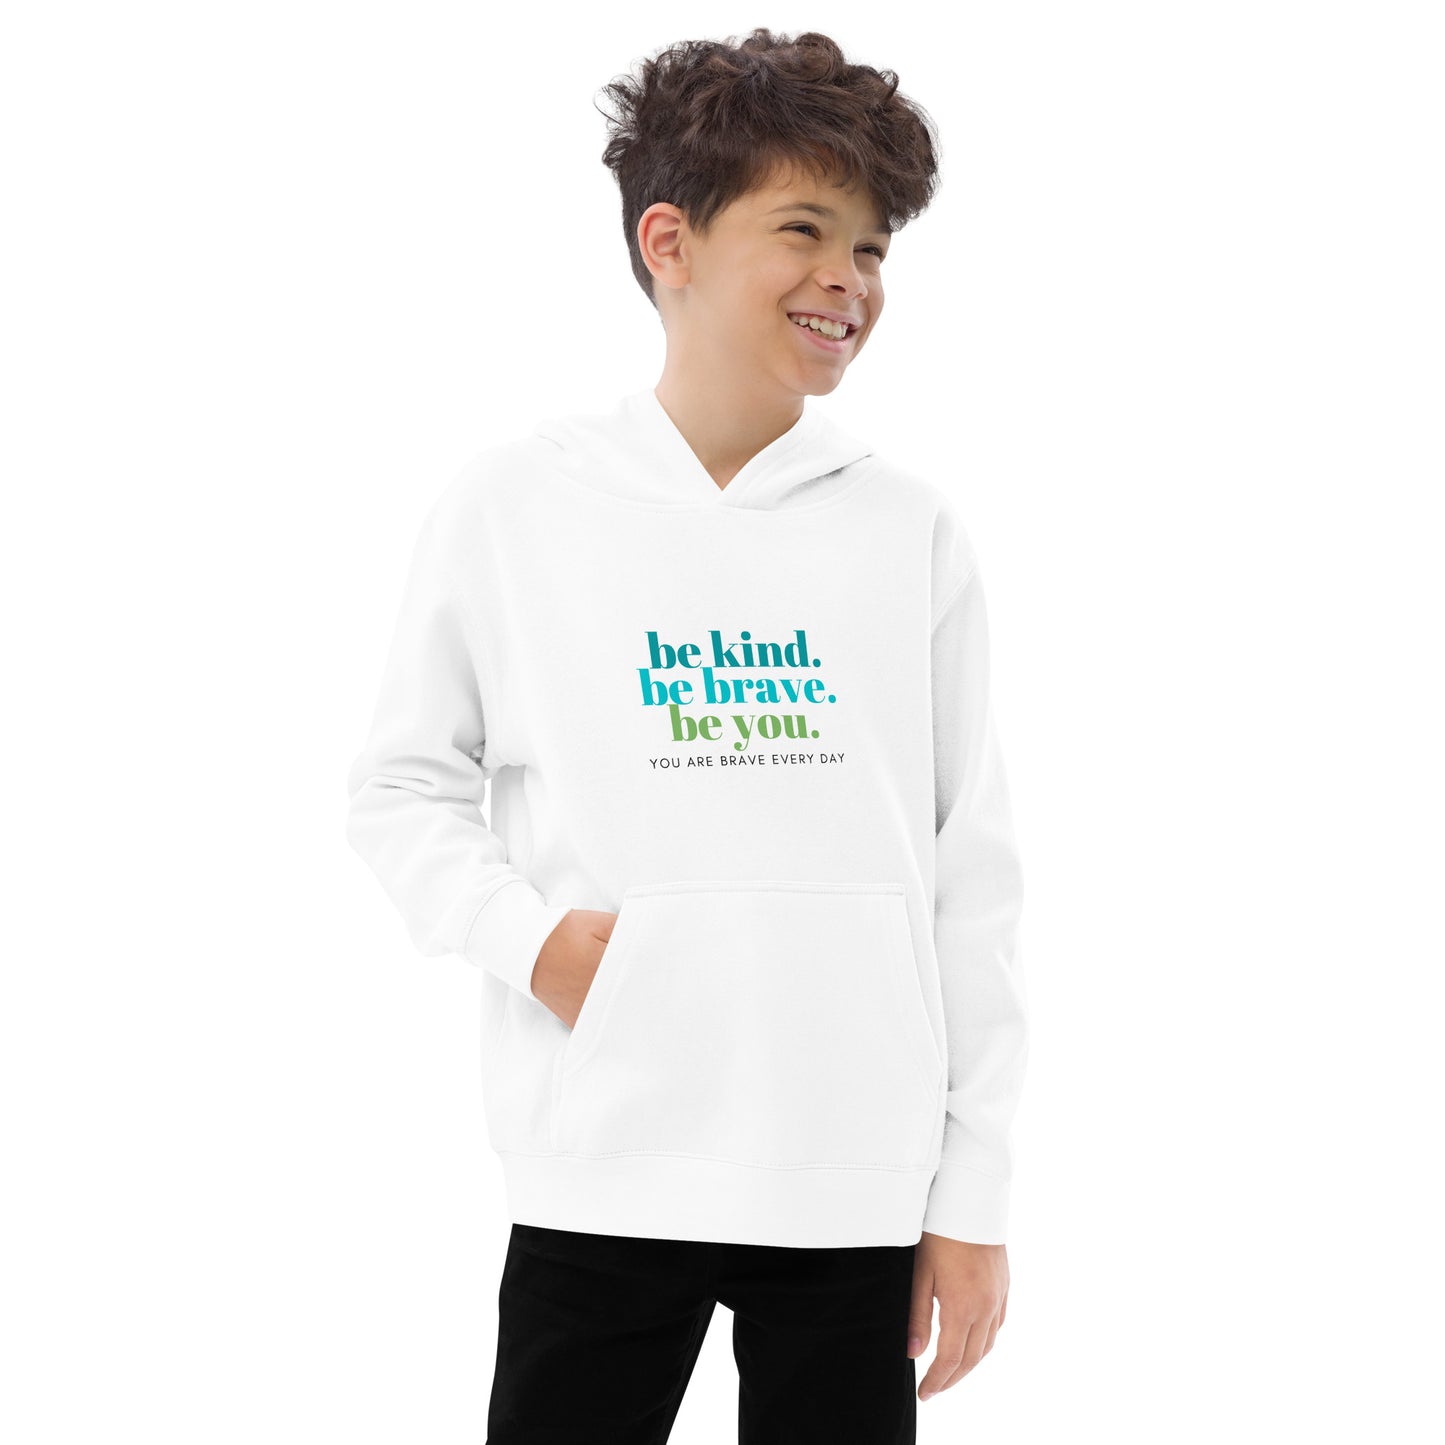 Kids fleece hoodie - be kind. be brave. be you. YOU ARE BRAVE EVERY DAY